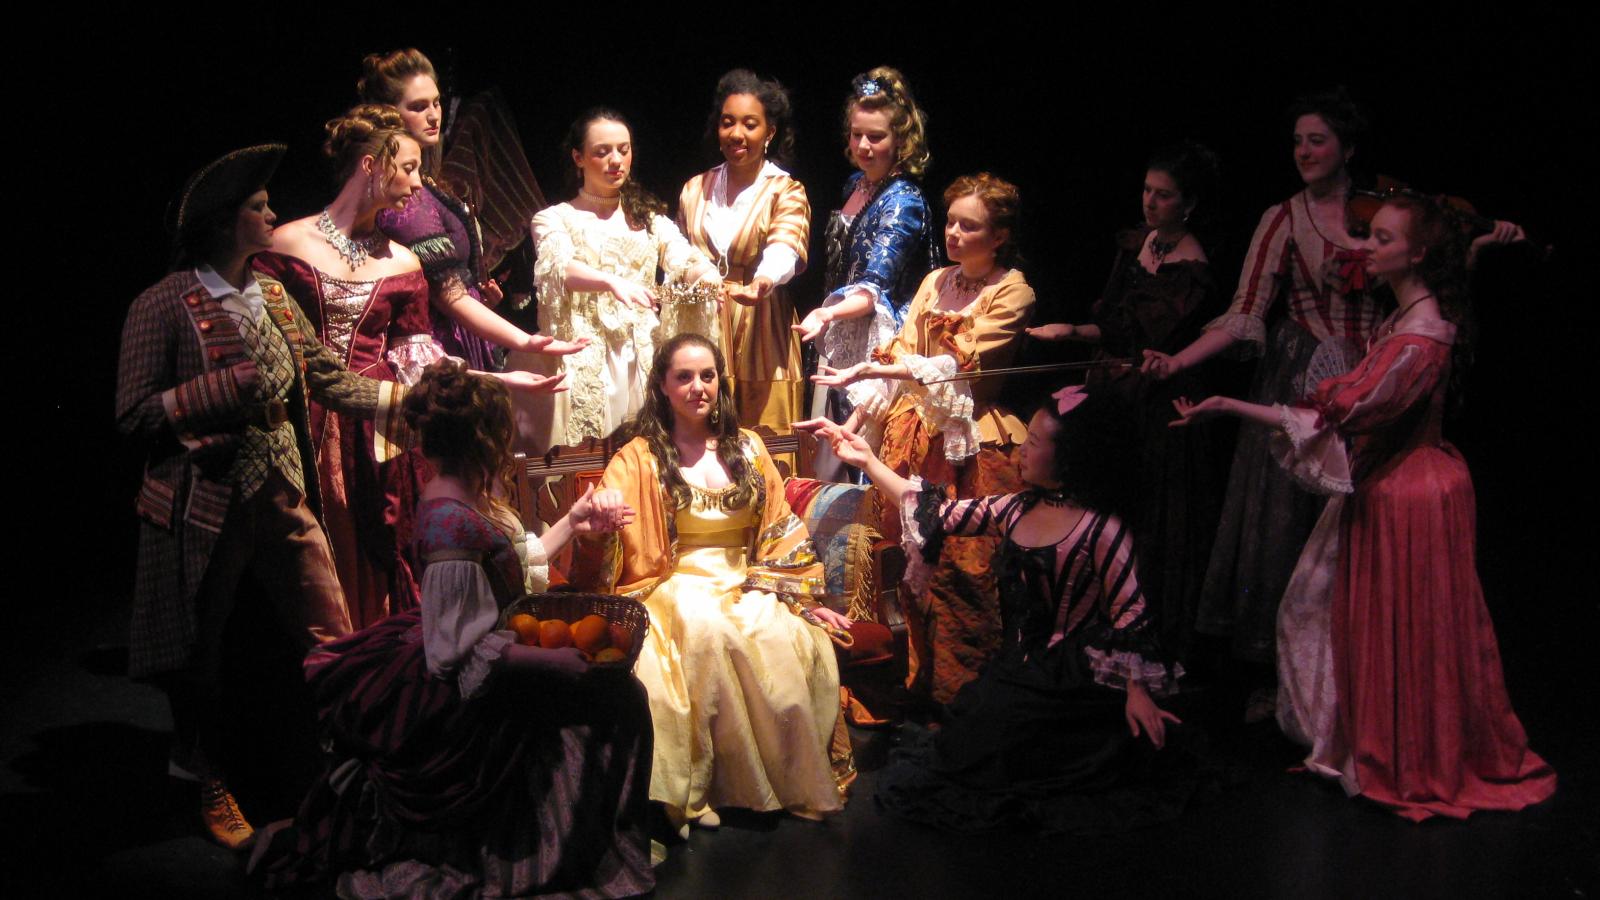 Final Tableau for production in Bowen Theatre, May 2014